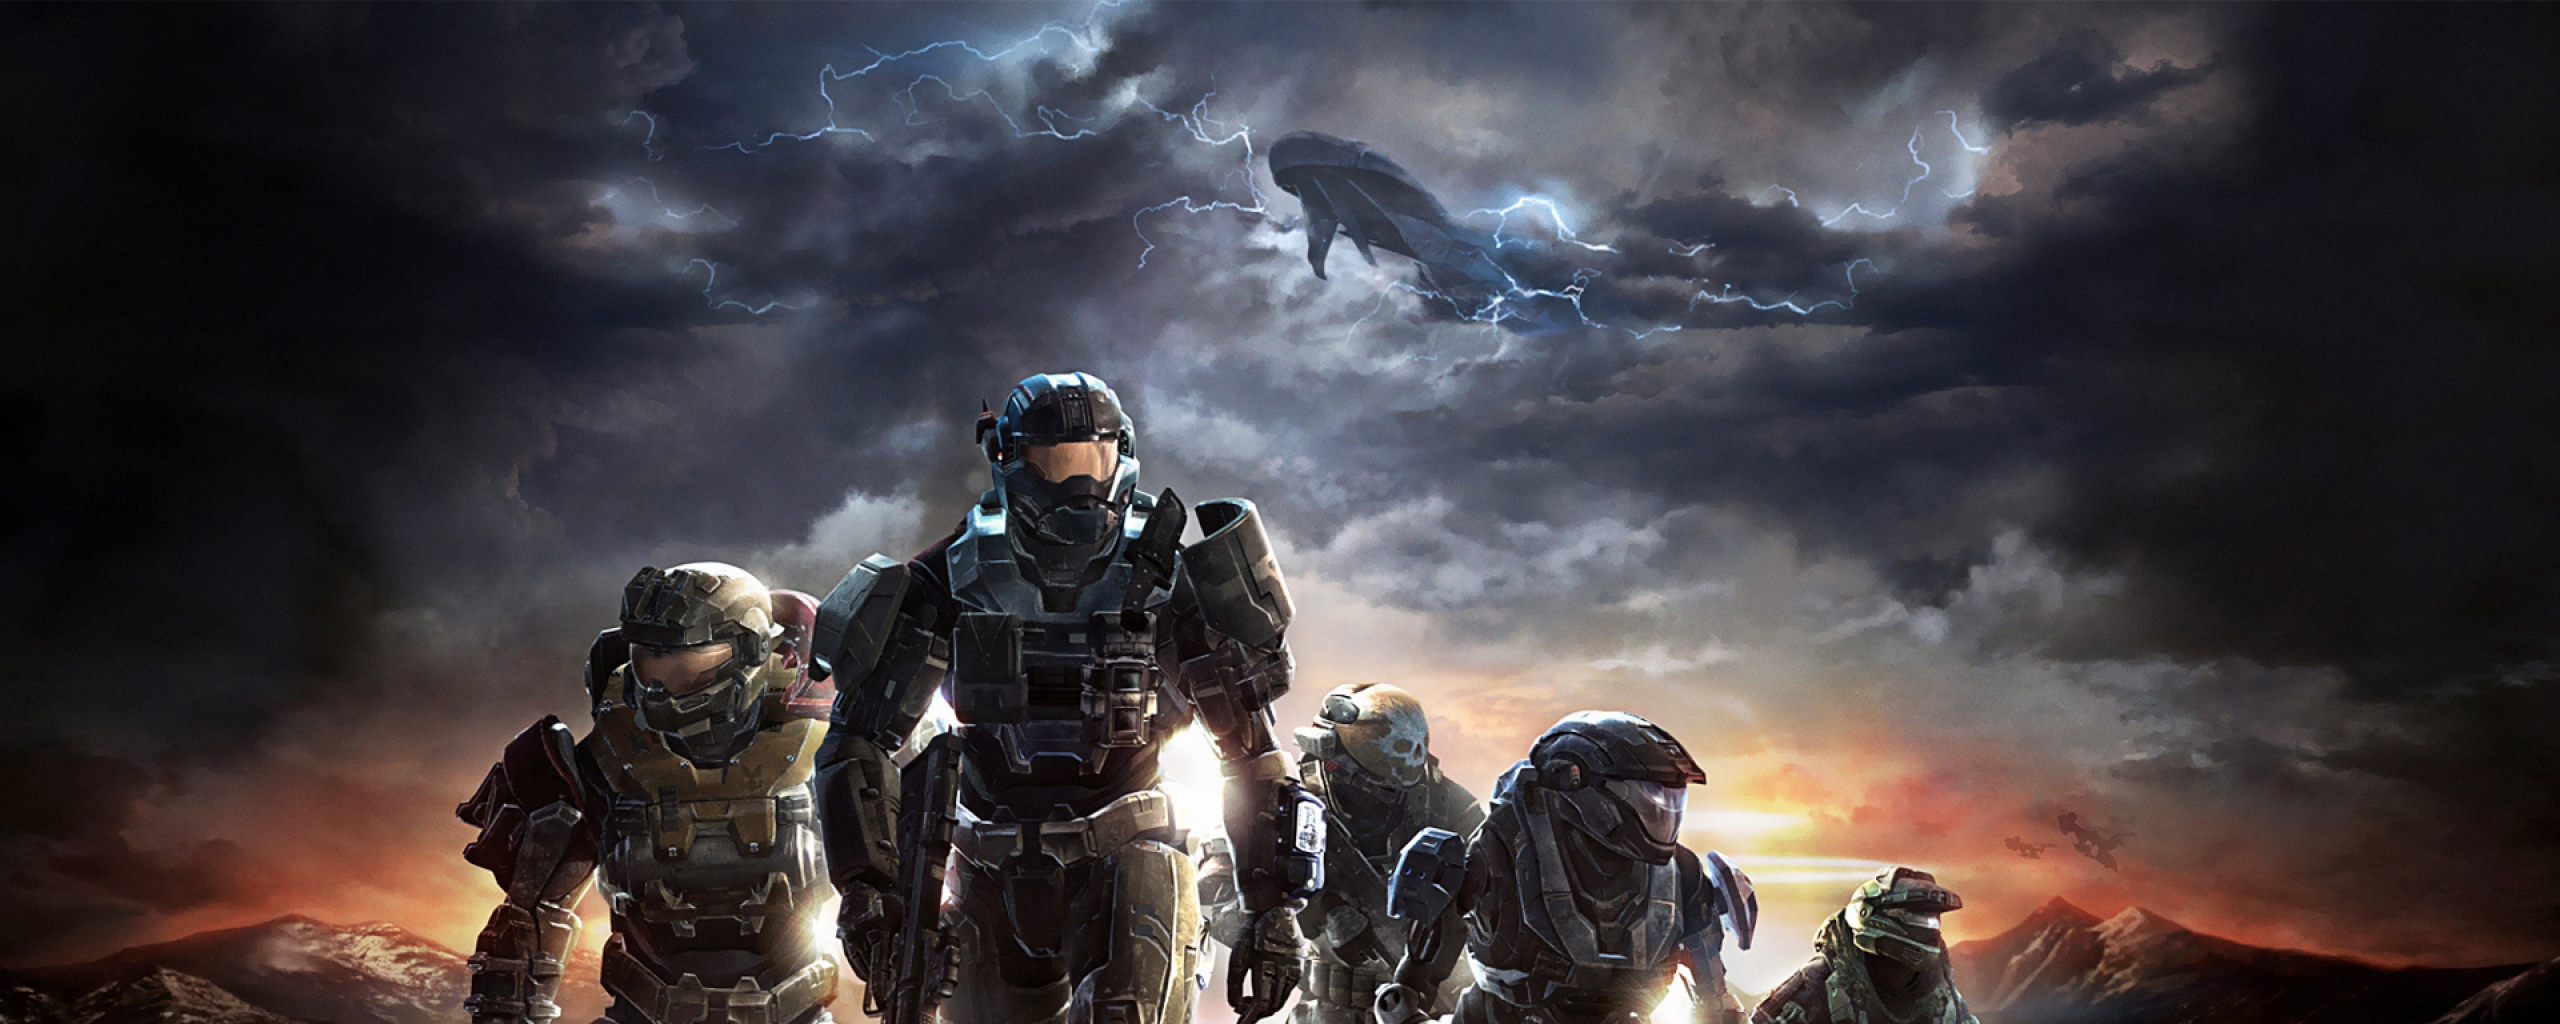 Halo Soldiers Sky Clouds Mountains Wallpaper Background Dual